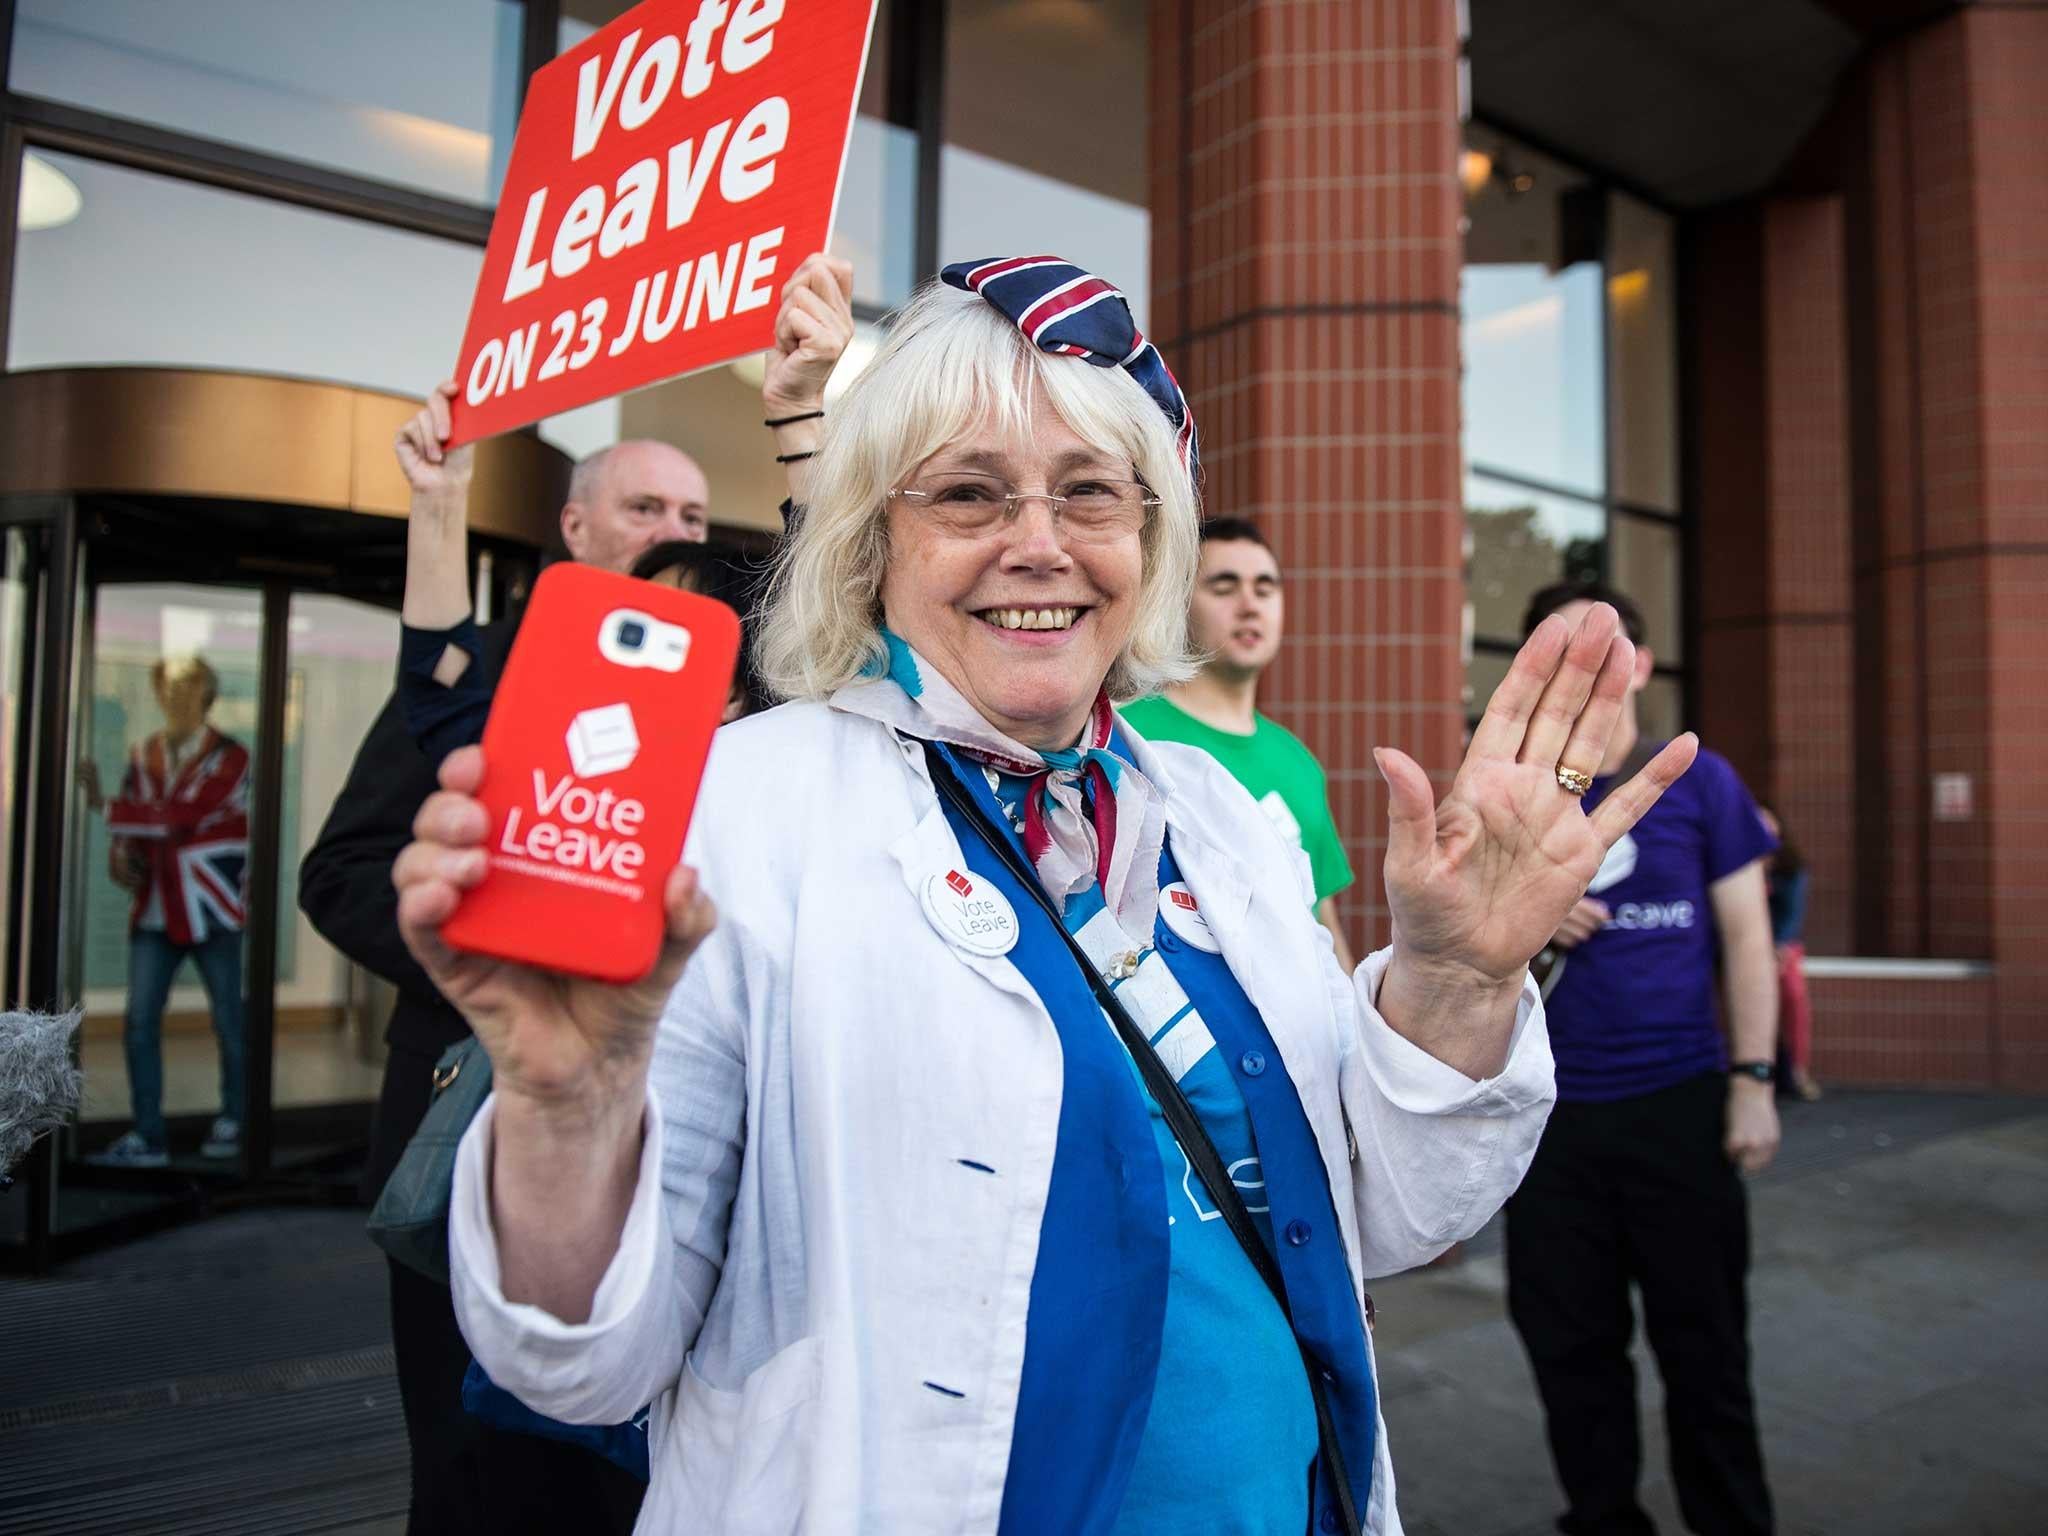 A vote LEAVE supporter Christine Forrester celebrates with others outside Vote Leave HQ, Westminster Tower in London